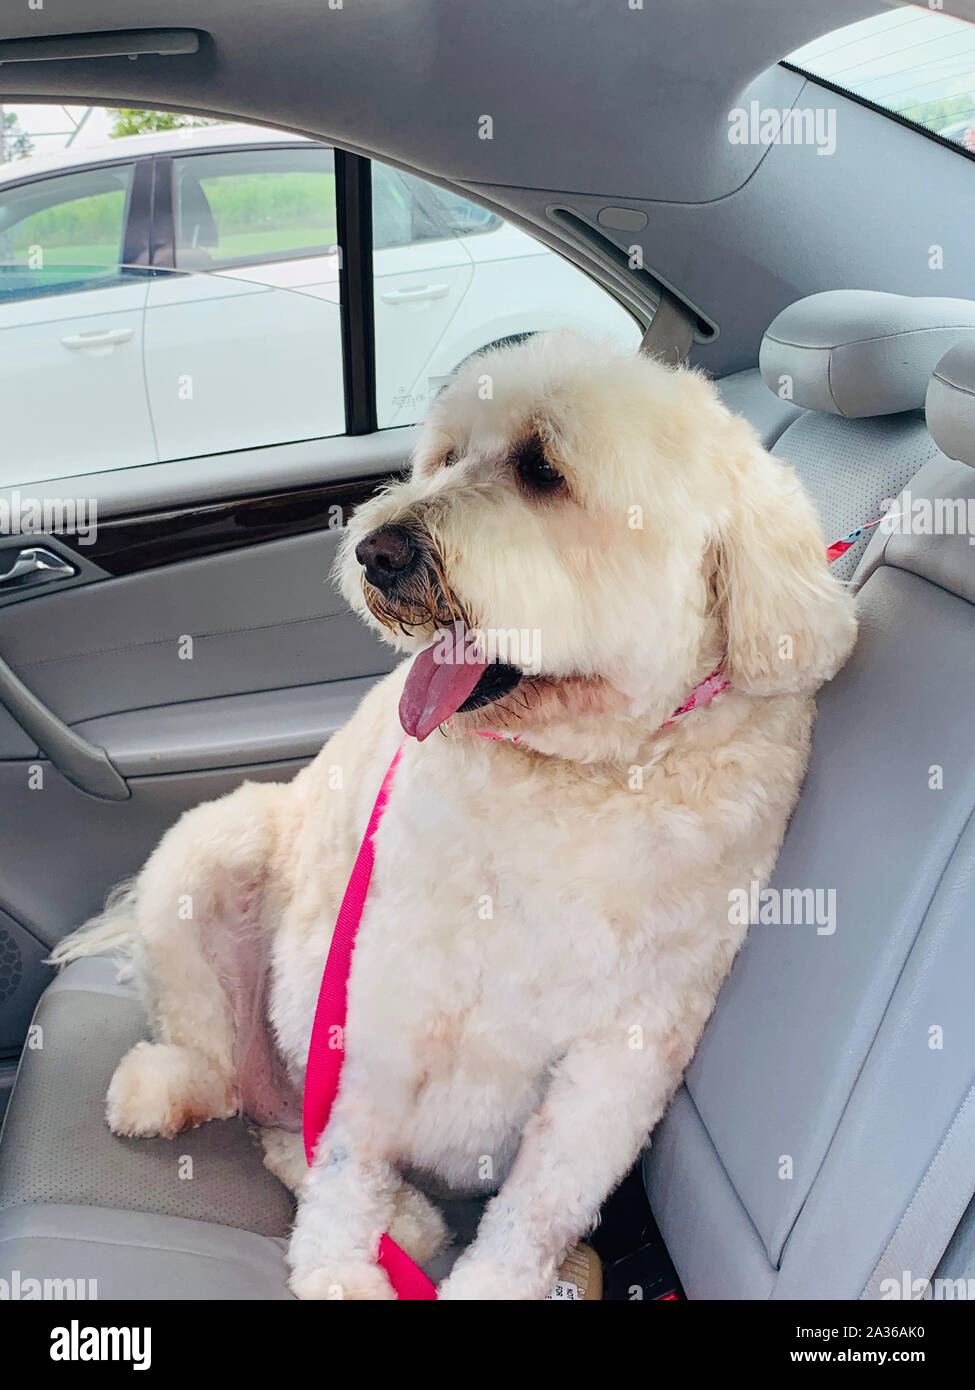 White Golden Doodle sits in back seat of car eager to go home after day of being groomed. Stock Photo